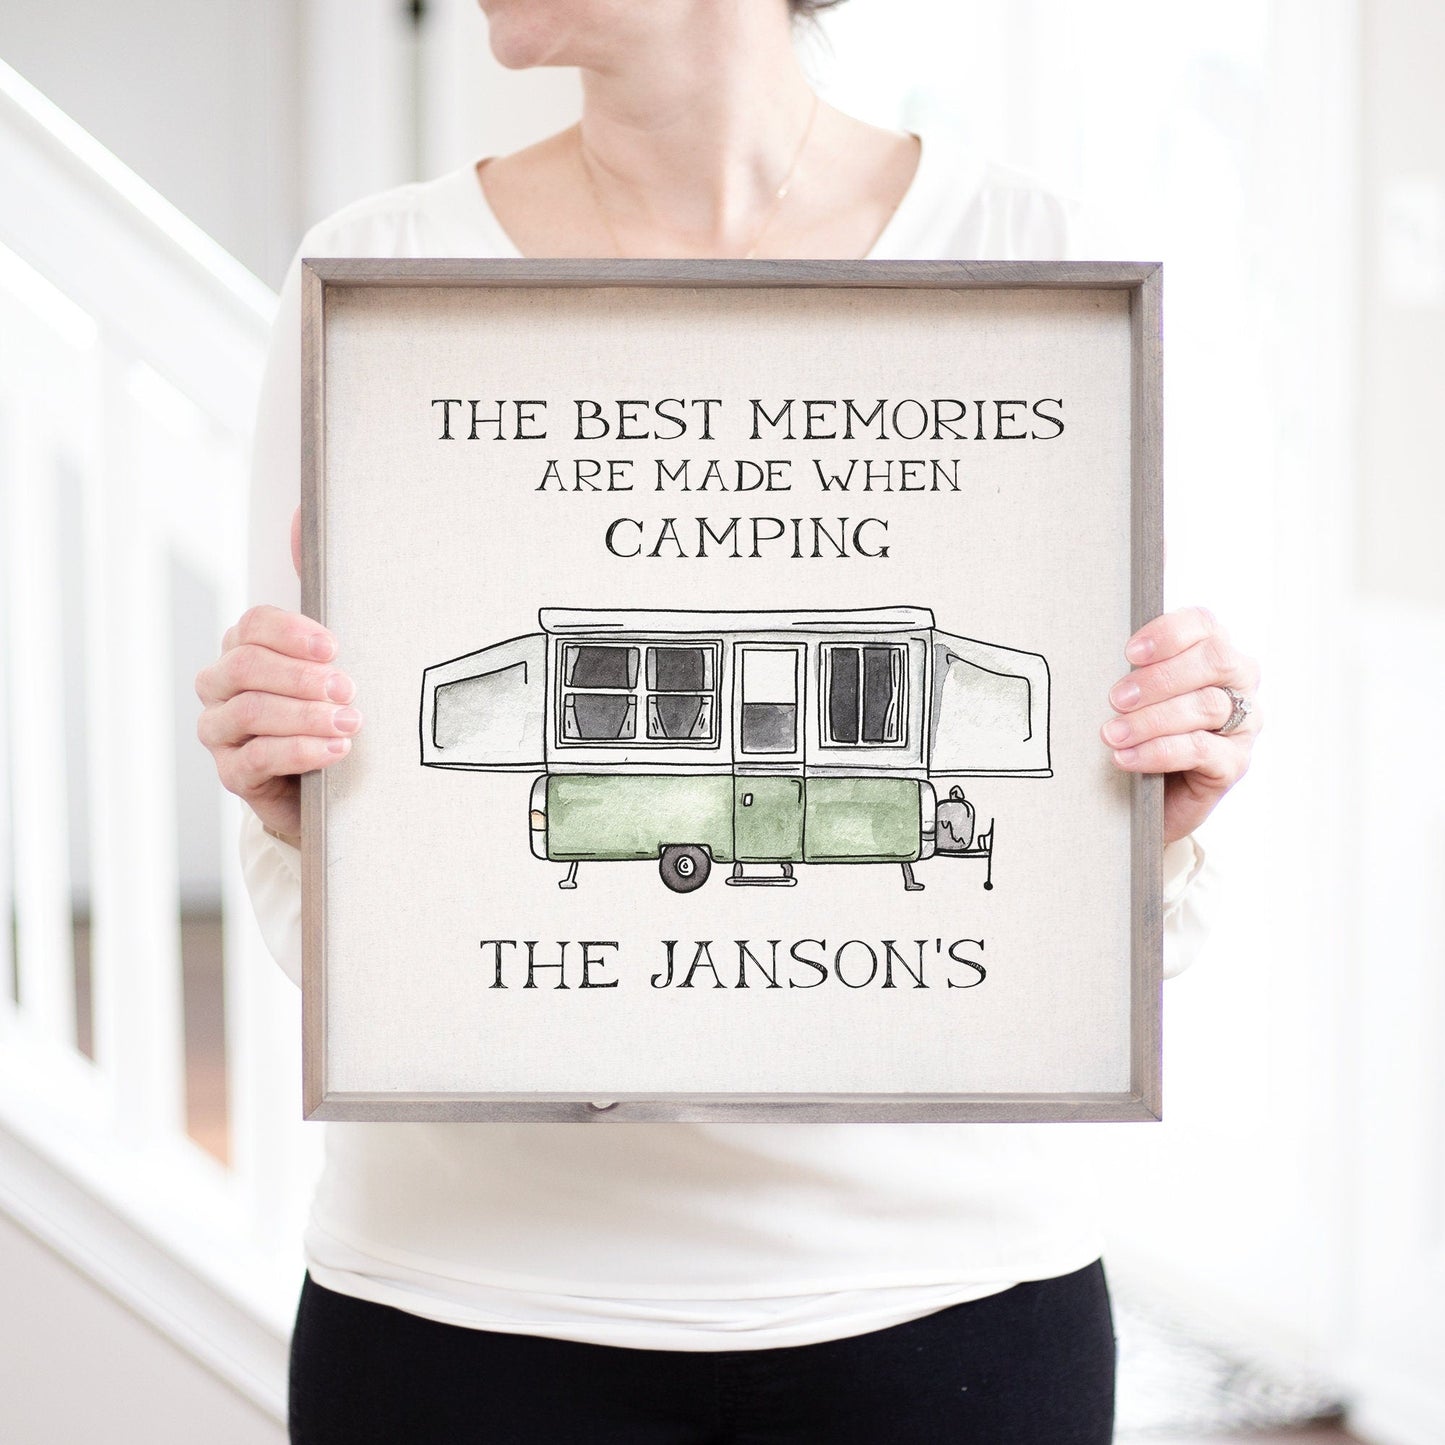 Load image into Gallery viewer, The Best Memories Are Made When Camping Sign | Pop Up Custom Camper Sign | RV Decor Wood Sign | CamperVan Trailer Decor | Campsite Decor - Sweet Hooligans Design
